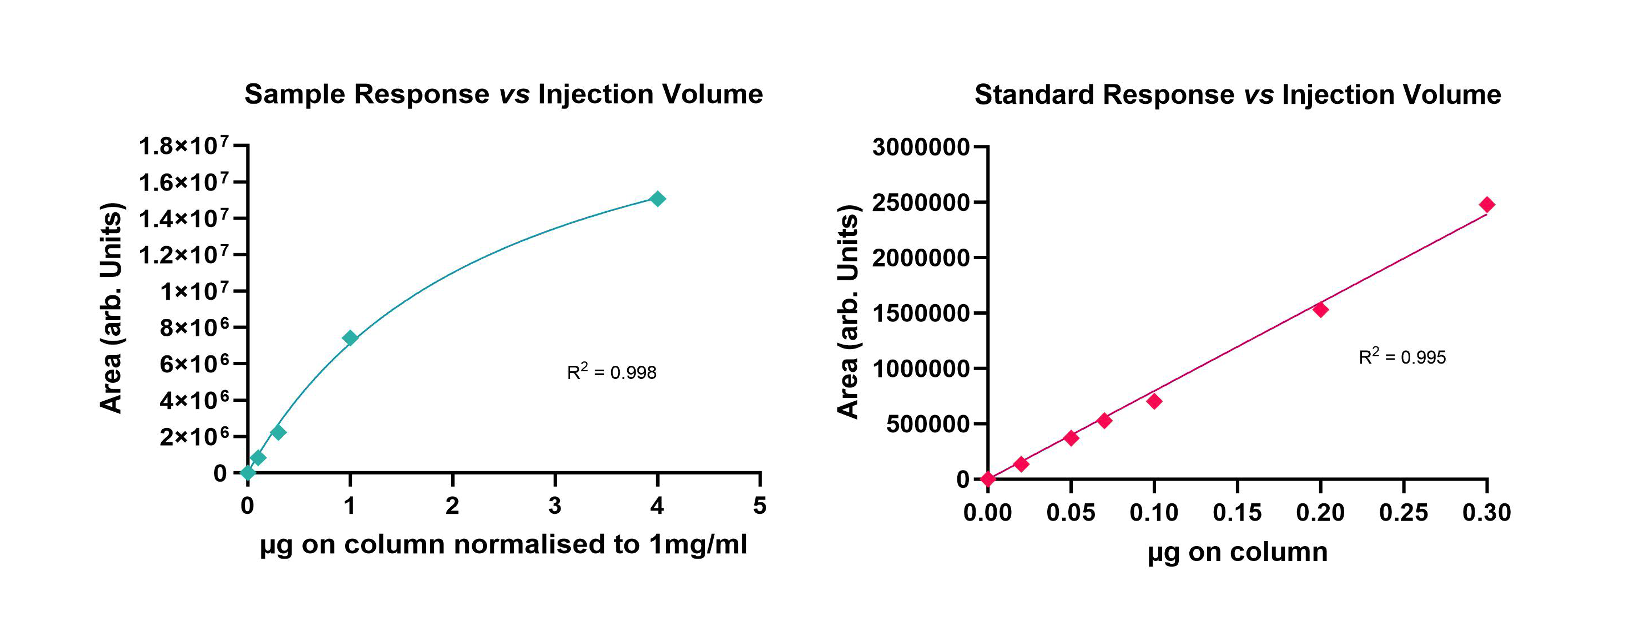 Figure 1: Plots showing UV absorbance of aqueous solution (left) and DMSO standard (right) at different injection volumes.